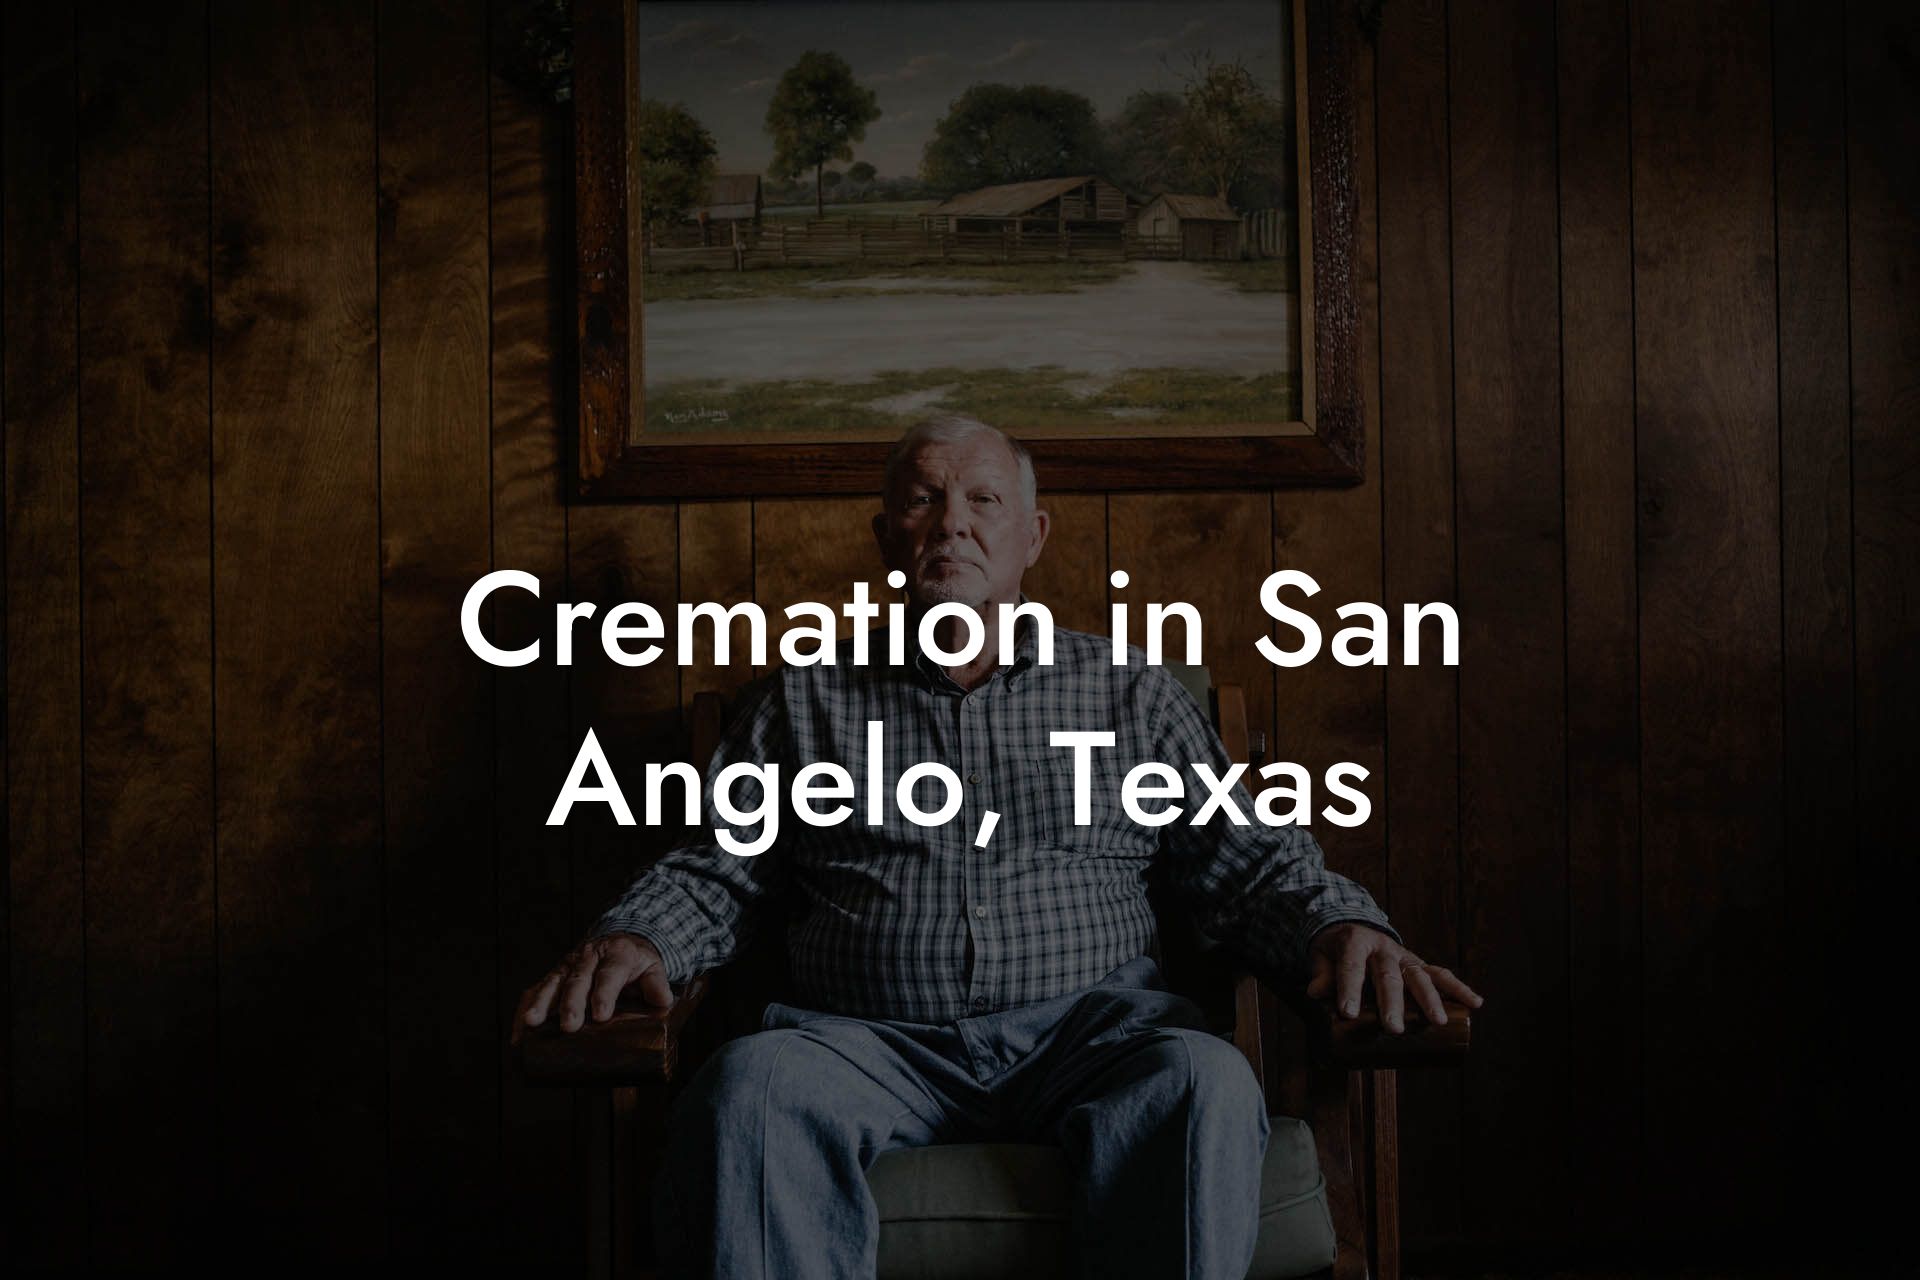 Cremation in San Angelo, Texas